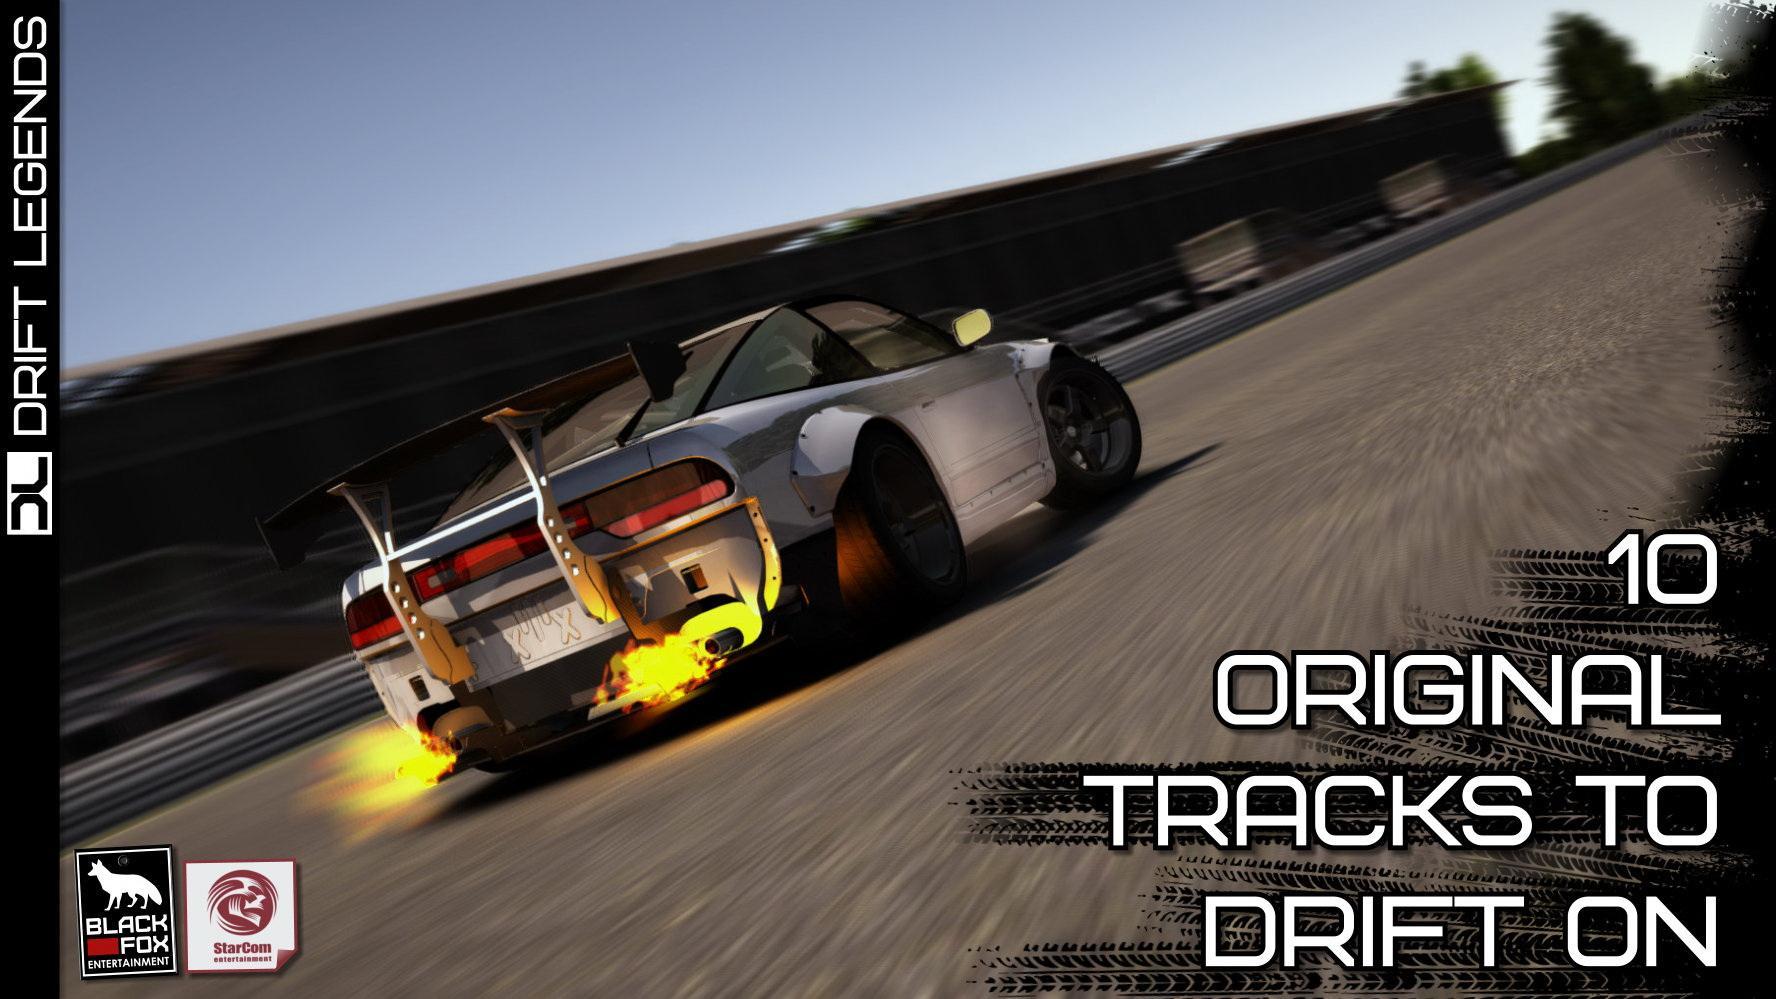 Real Drift Car Racing Lite - Apps on Google Play